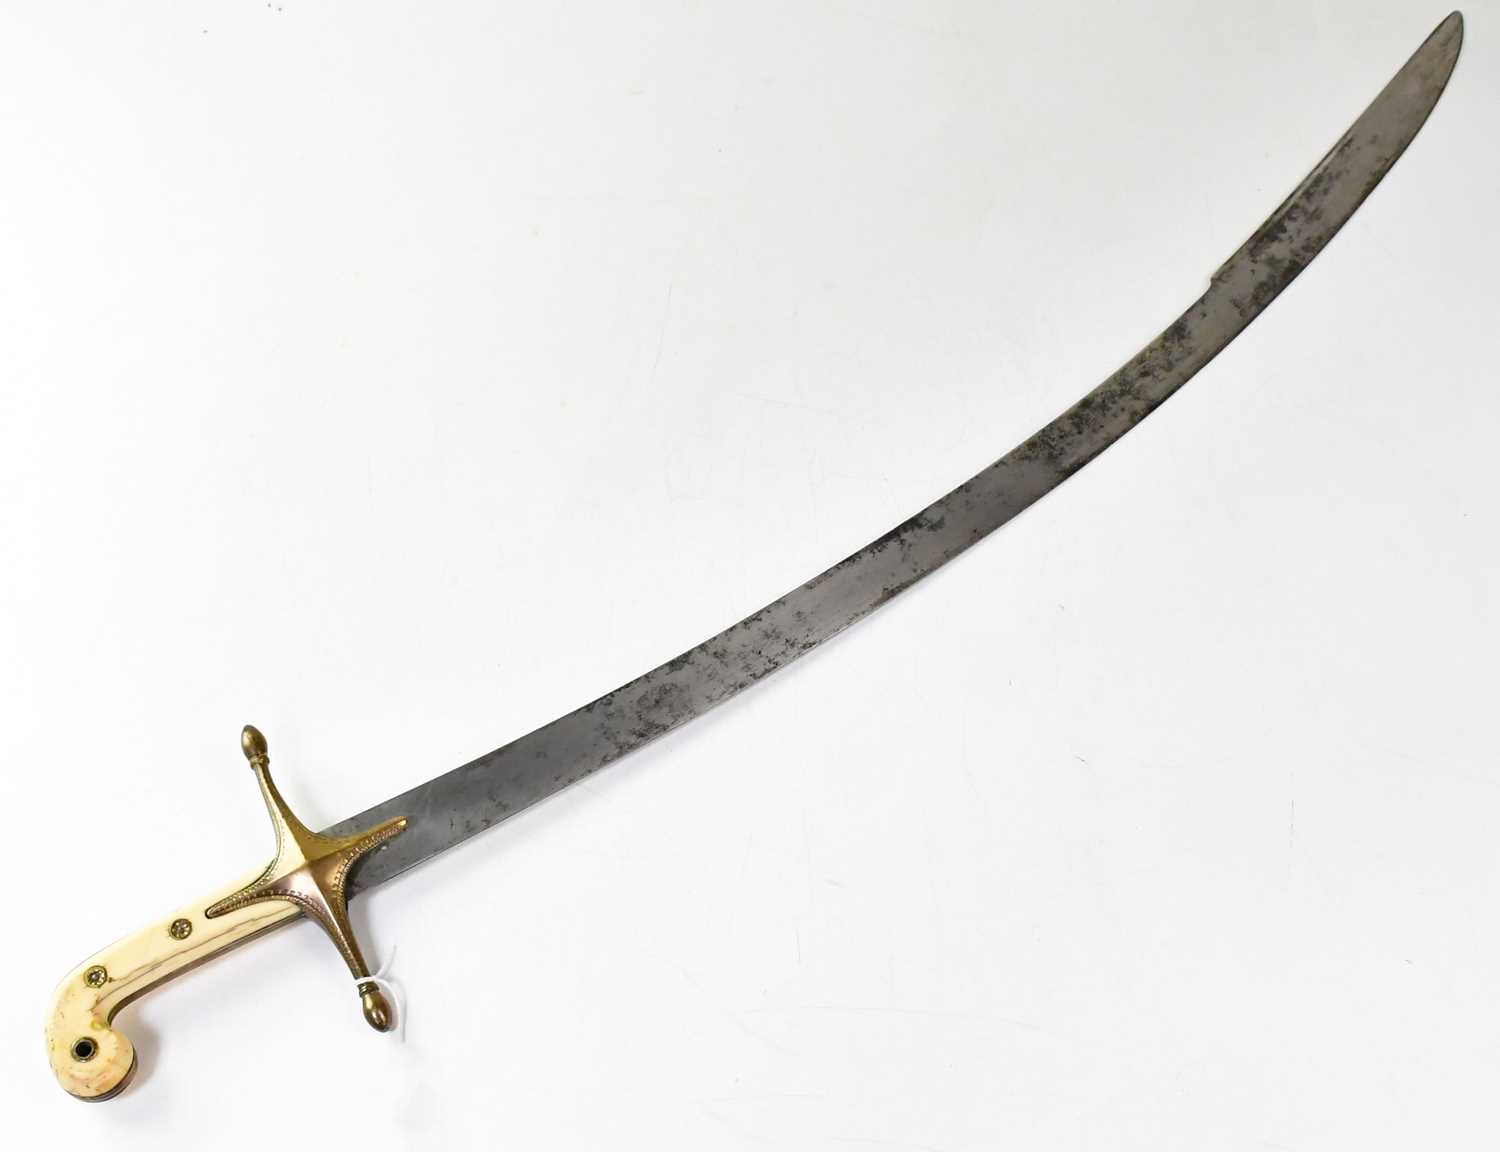 X A early 19th century Mameluke cavalry officer's sword, with 31" Kilij curved single-edged blade